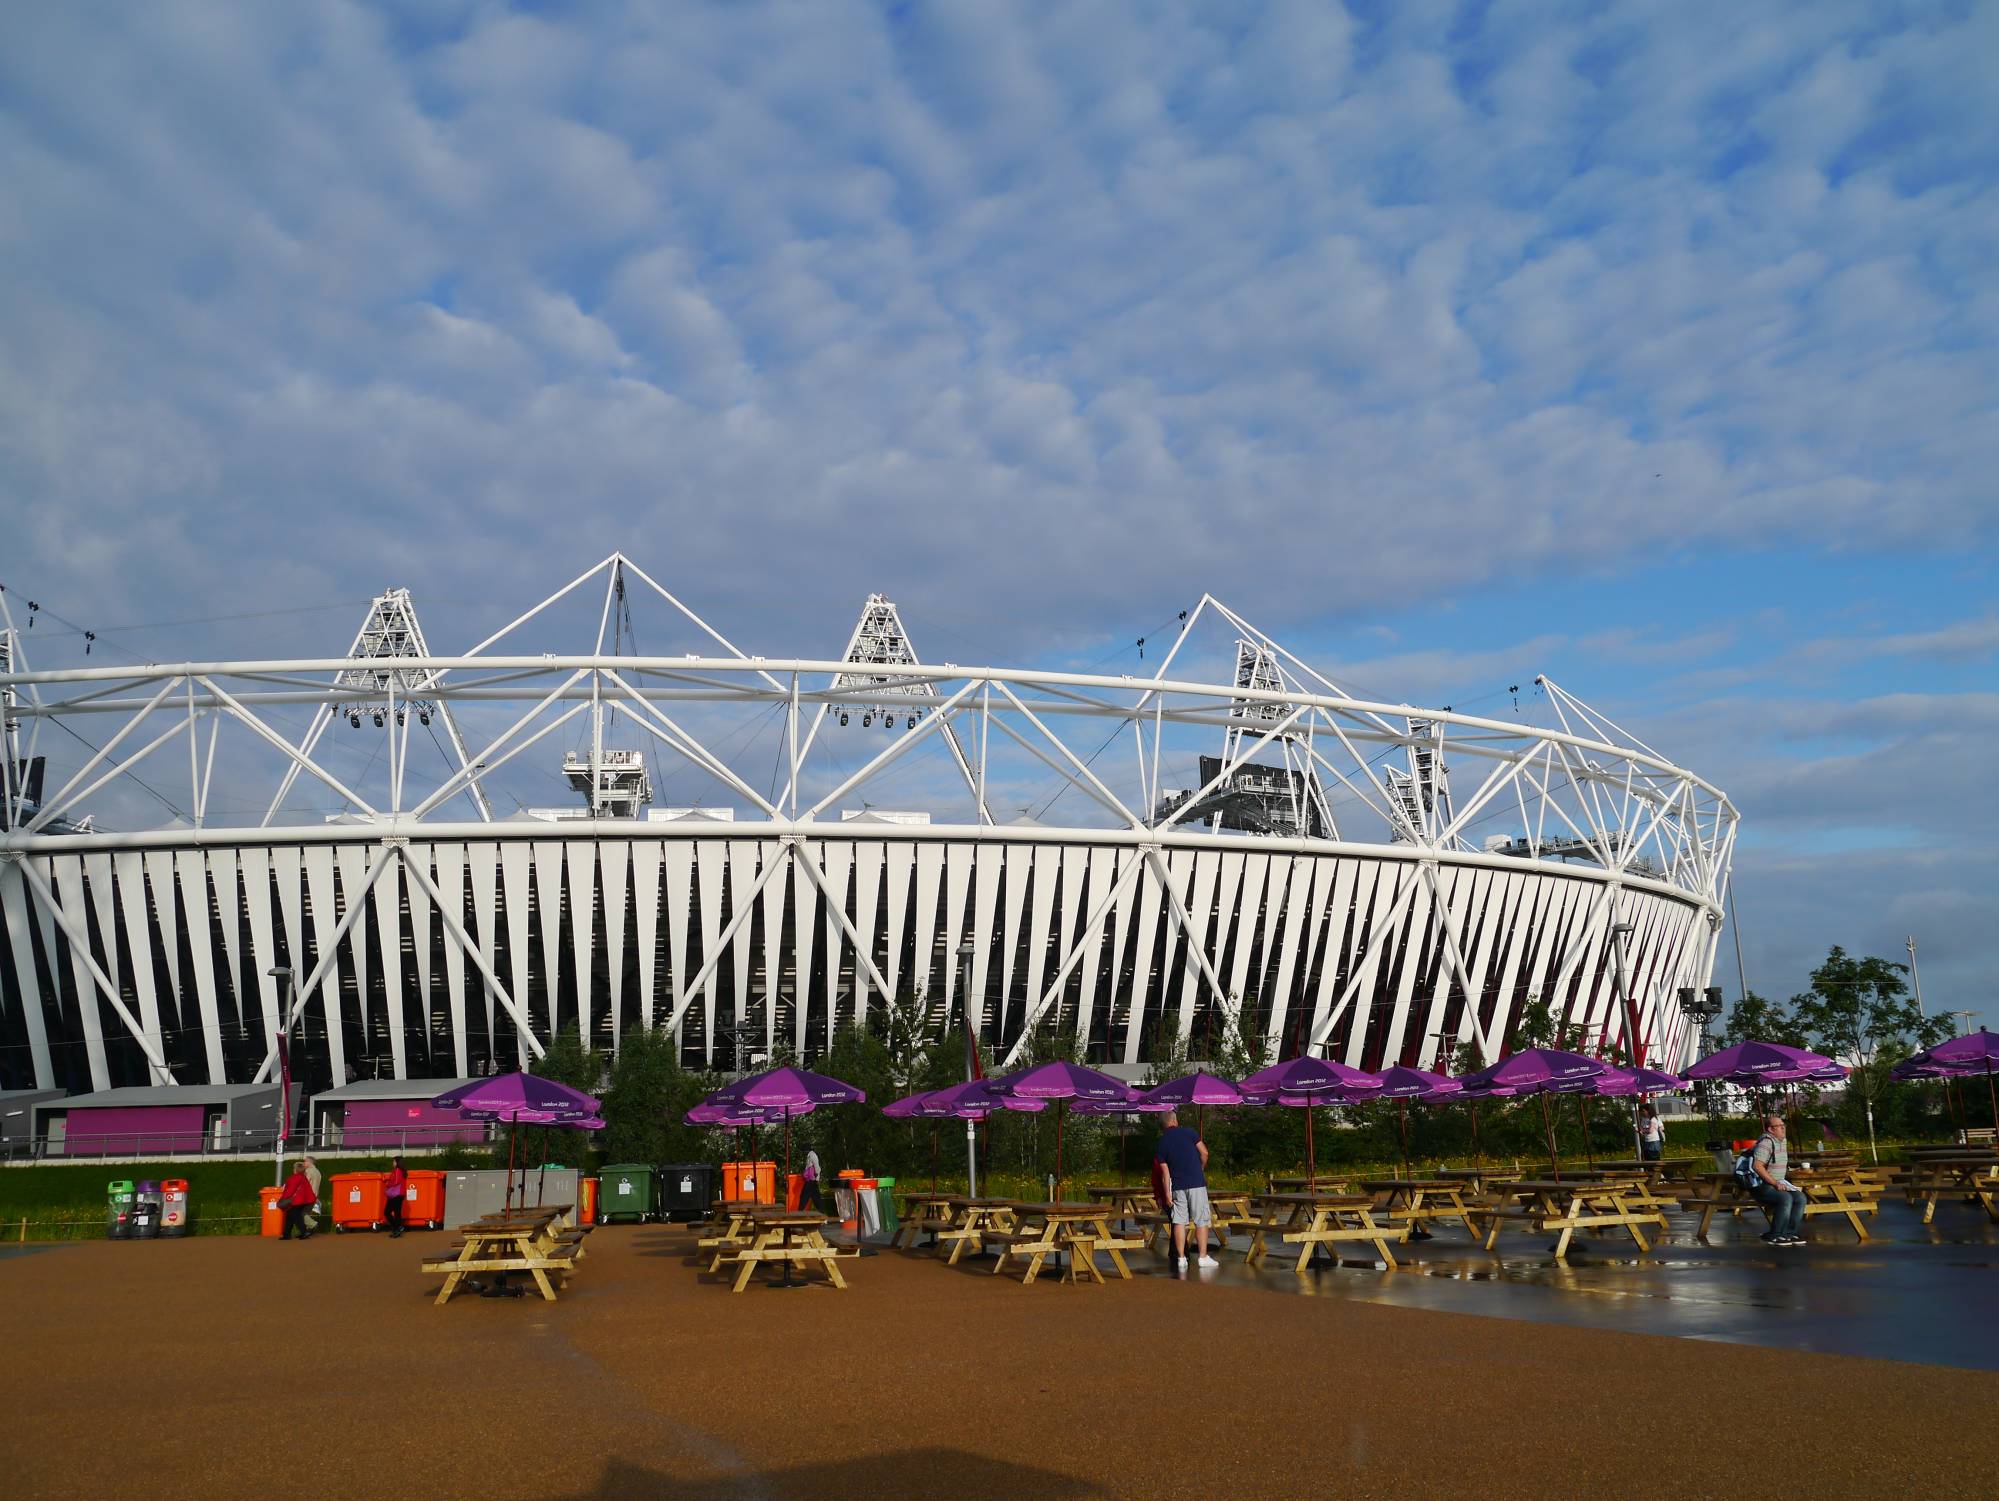 Explore the London Olympics venues from a Disney fans point of view | PassPorter.com